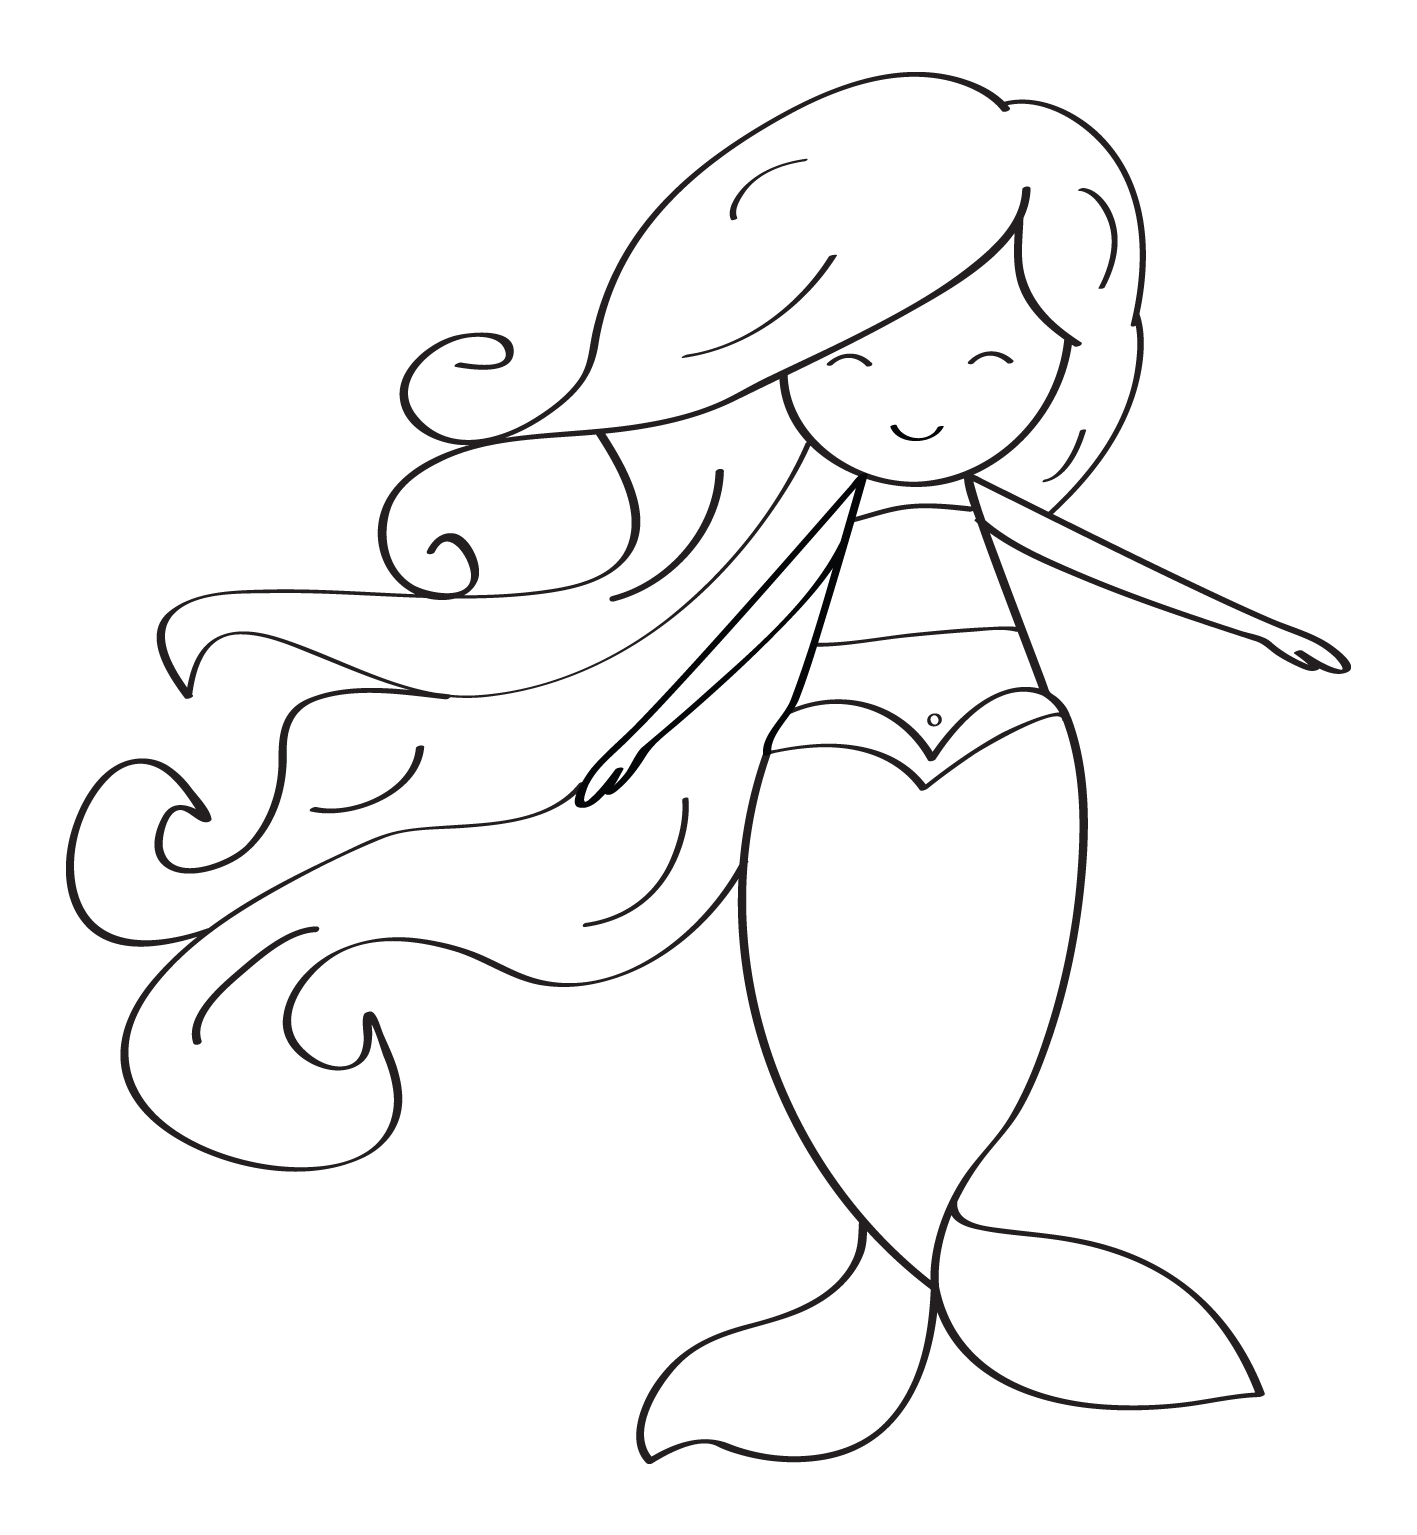 Outline clipart mermaid, Outline mermaid Transparent FREE for download on WebStockReview 2020